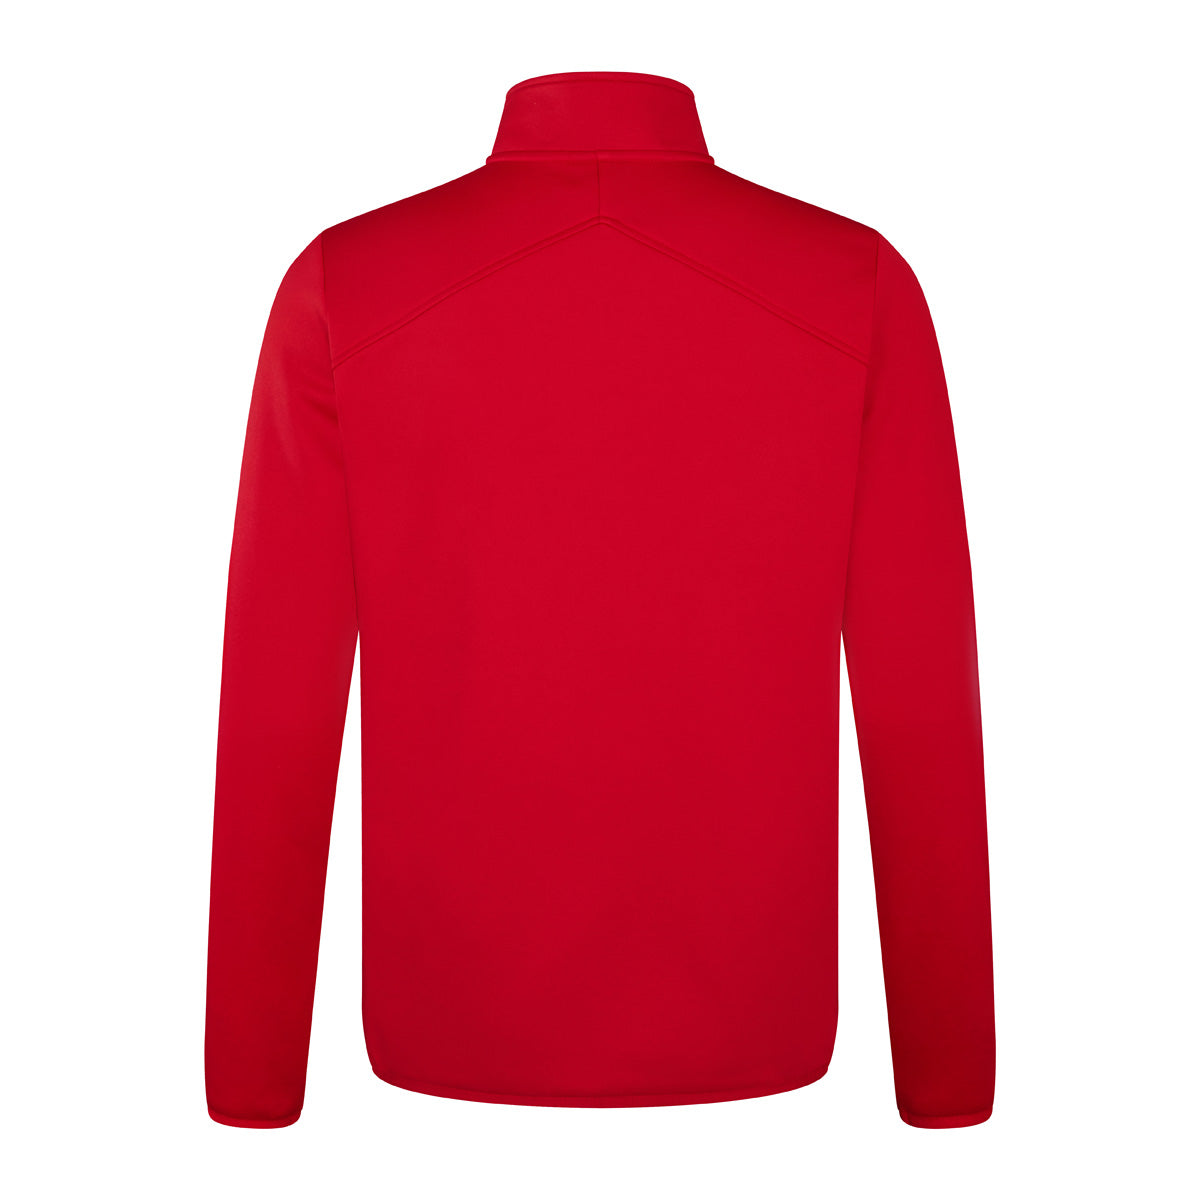 Photo of the Canterbury Womens Club 1/4 Zip Mid Layer Training Top in Red, back view